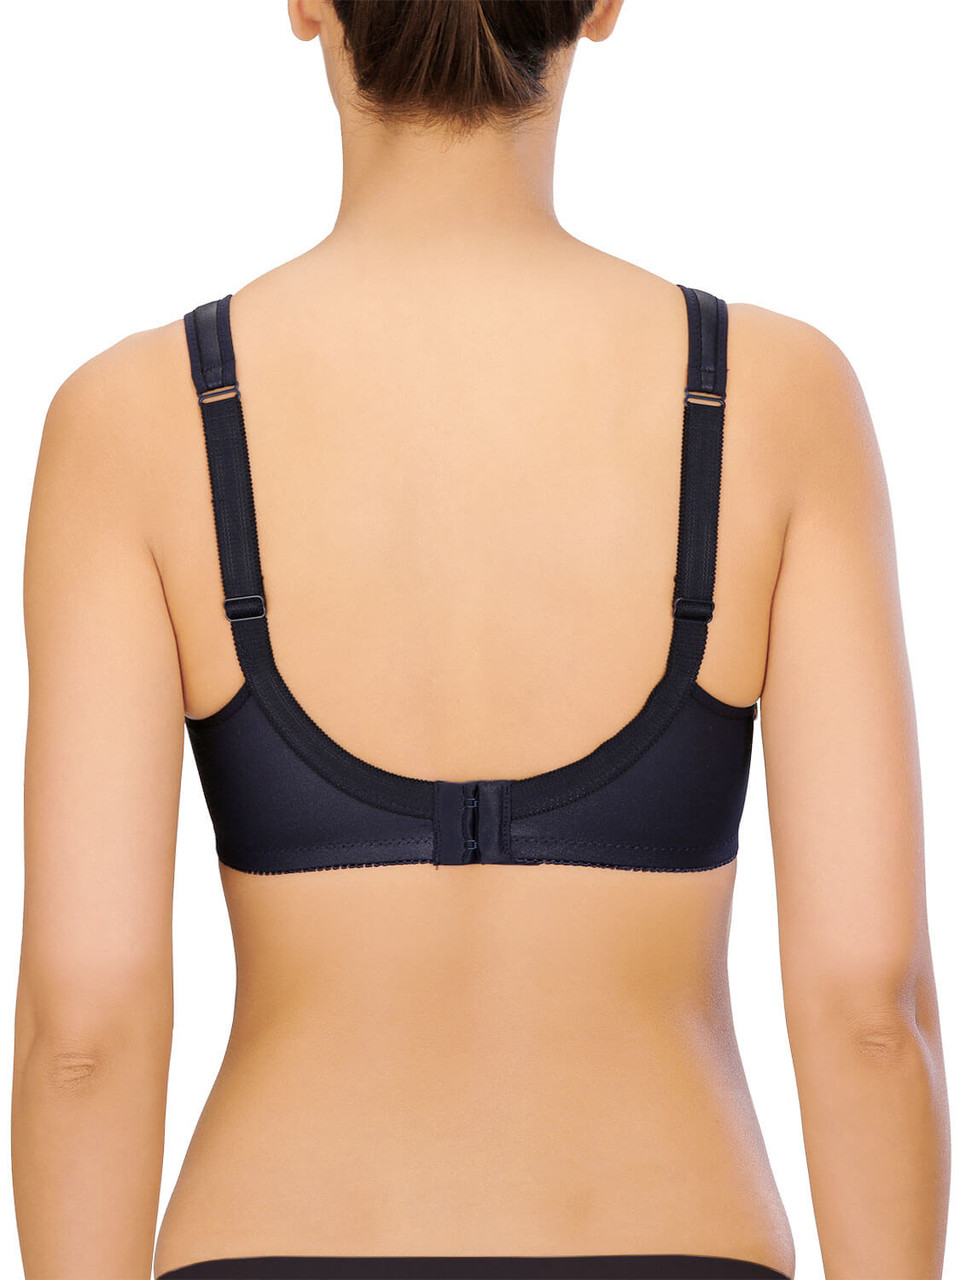 Naturana Wirefree Cotton Full Cup Bra with Lace inserts (B–E 36–46) 5515